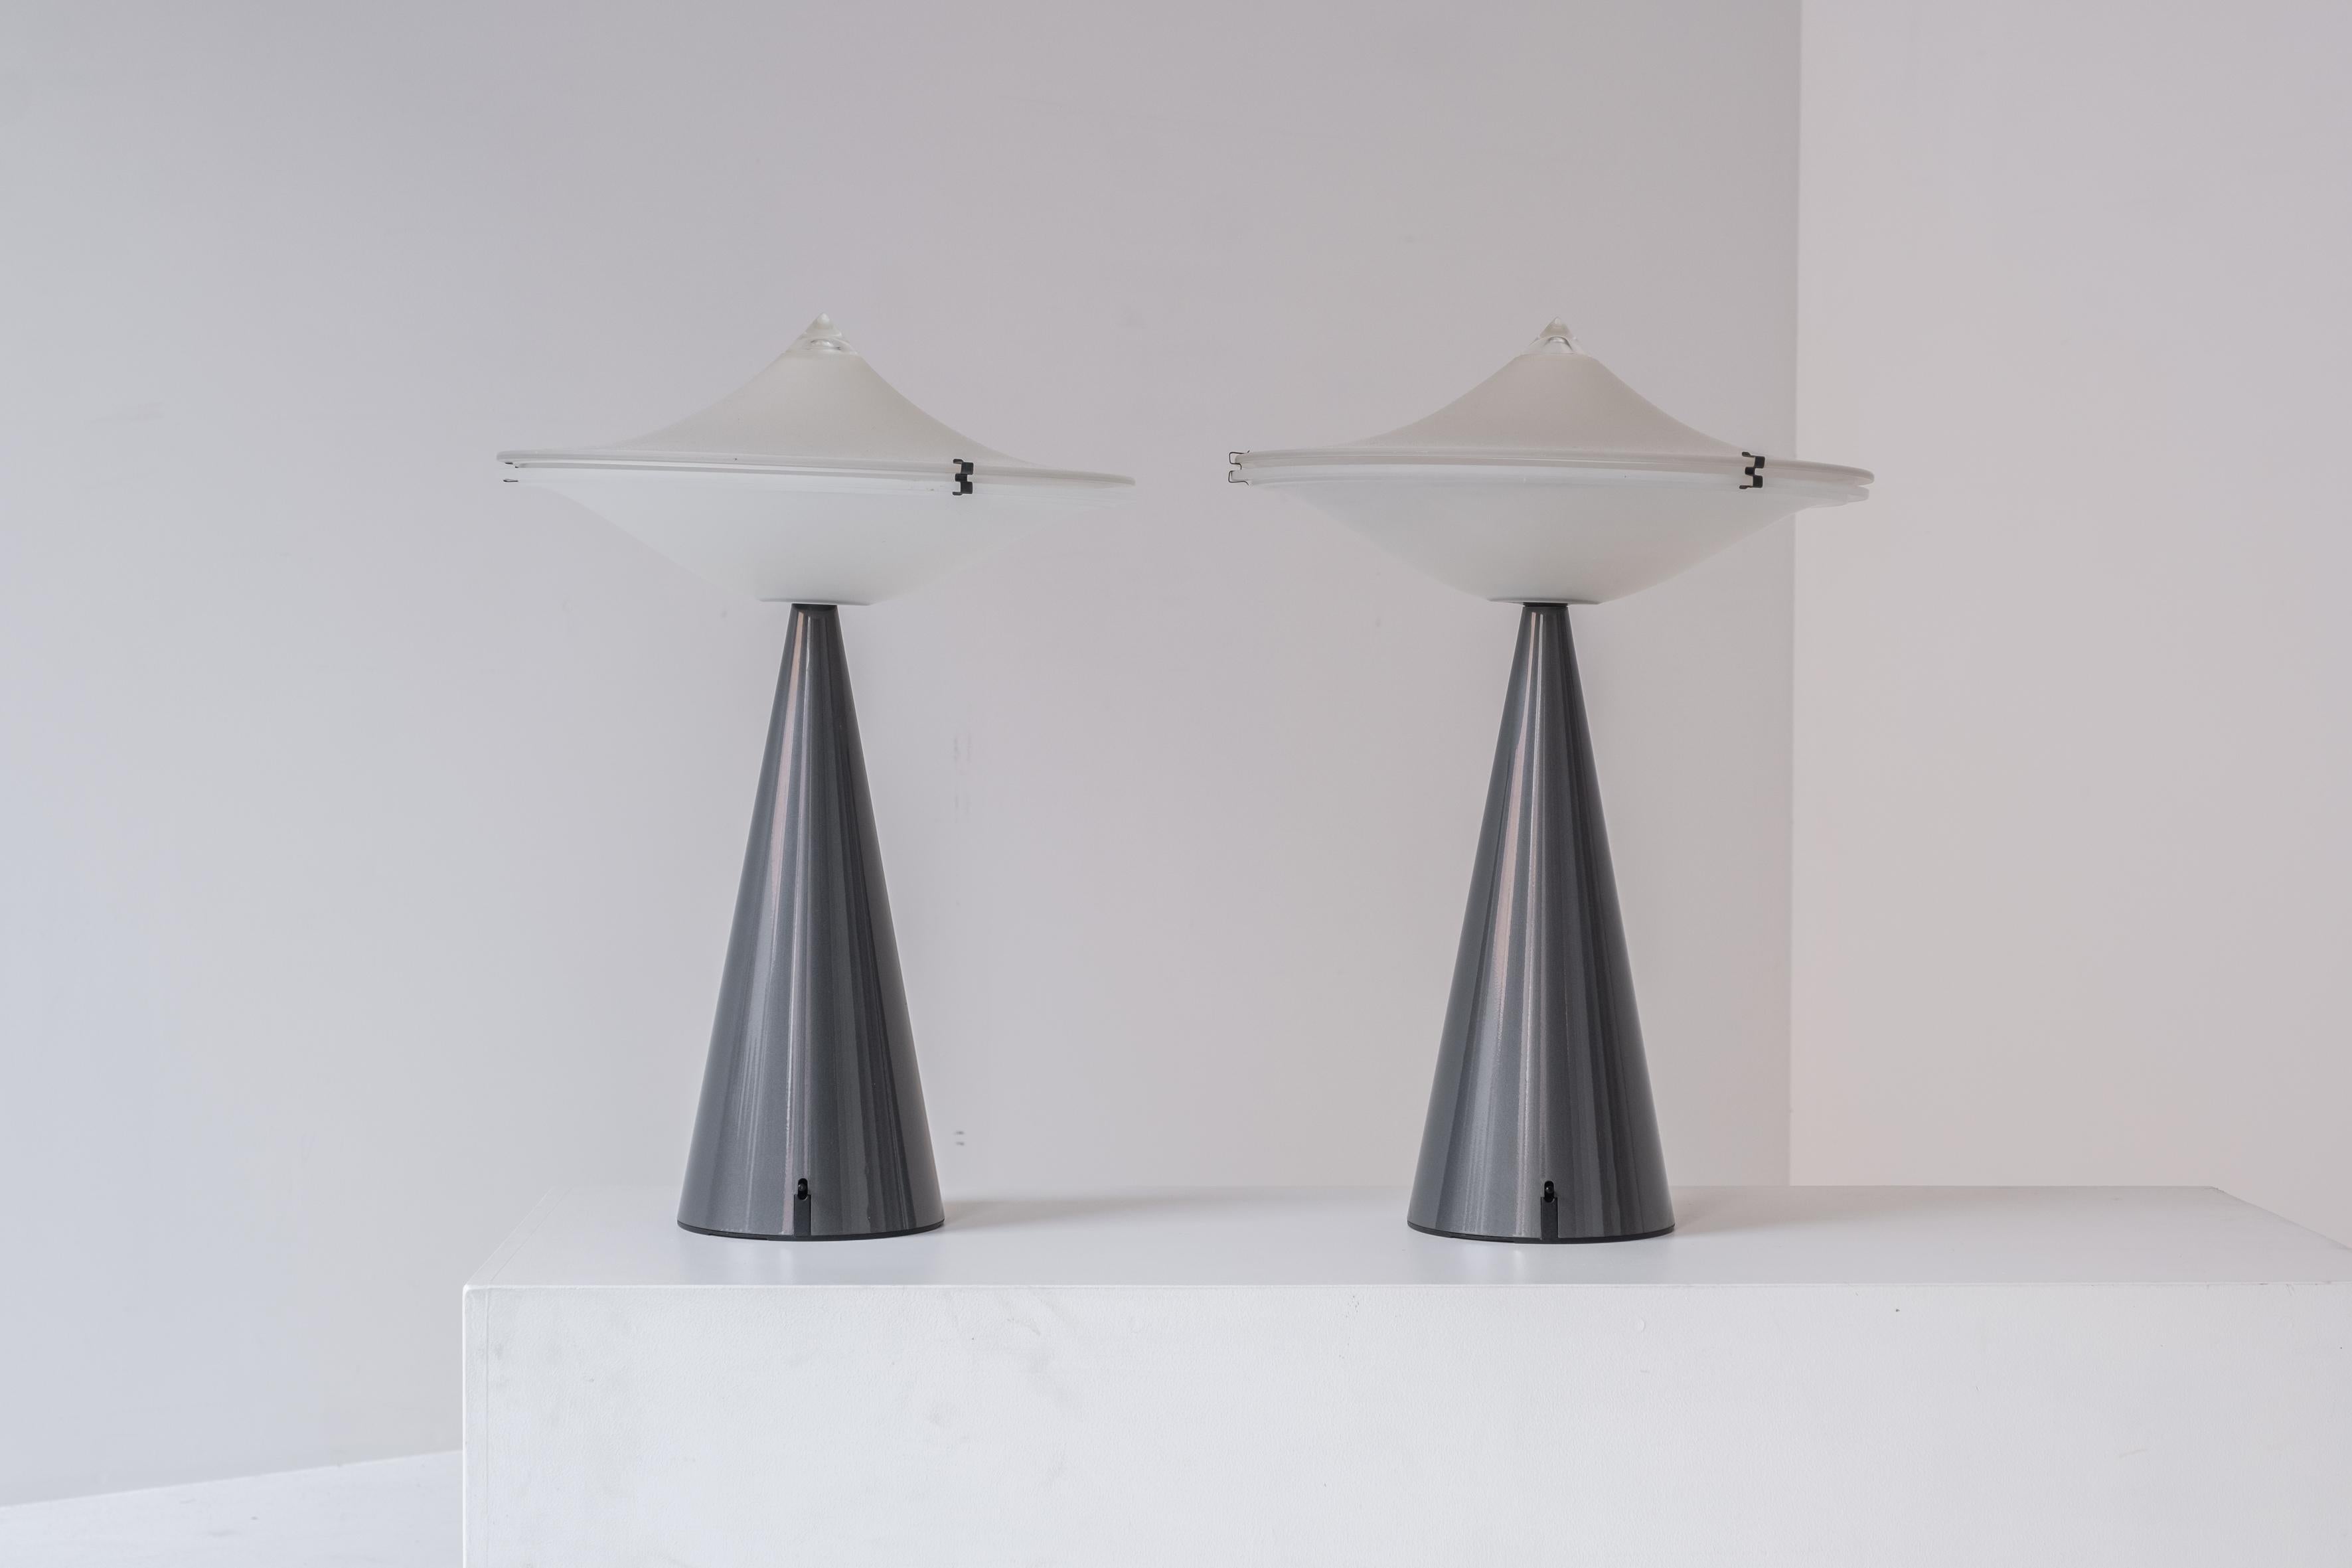 Set of two table lamps by Luciano Cesaro for Tre Ci Luce, Italy 1980s. The lamps features solid heavy metal bases in grey lacquer and two thick opaline milk glass shades. The base is provided with a switch that controls the halogen lamp inside. Very